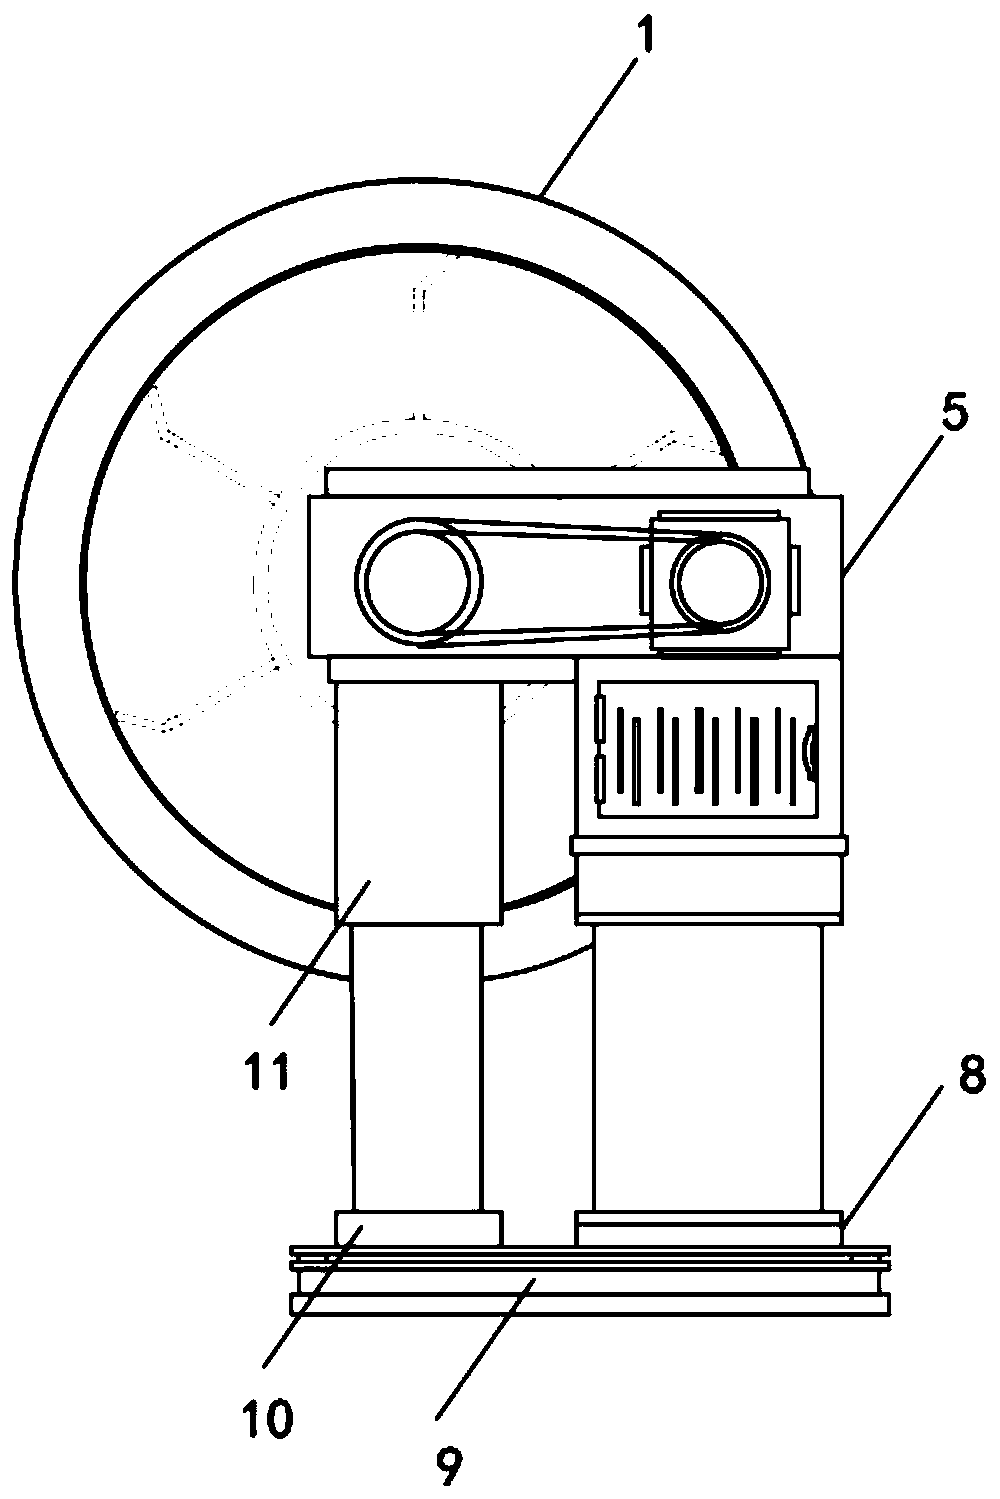 Impacted type energy-making power device